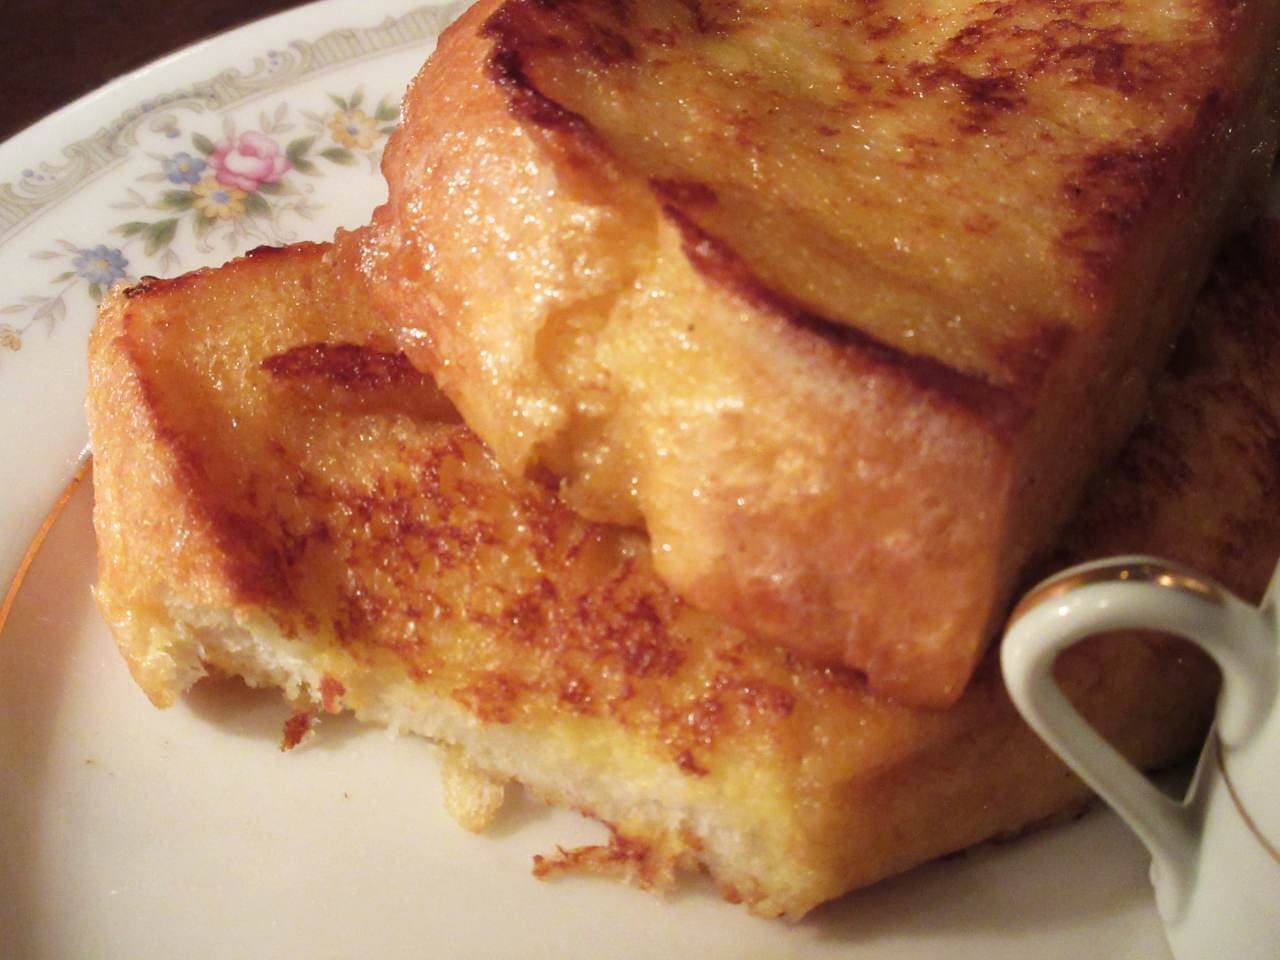 "French toast" from Gakugei University "Equal temperament"